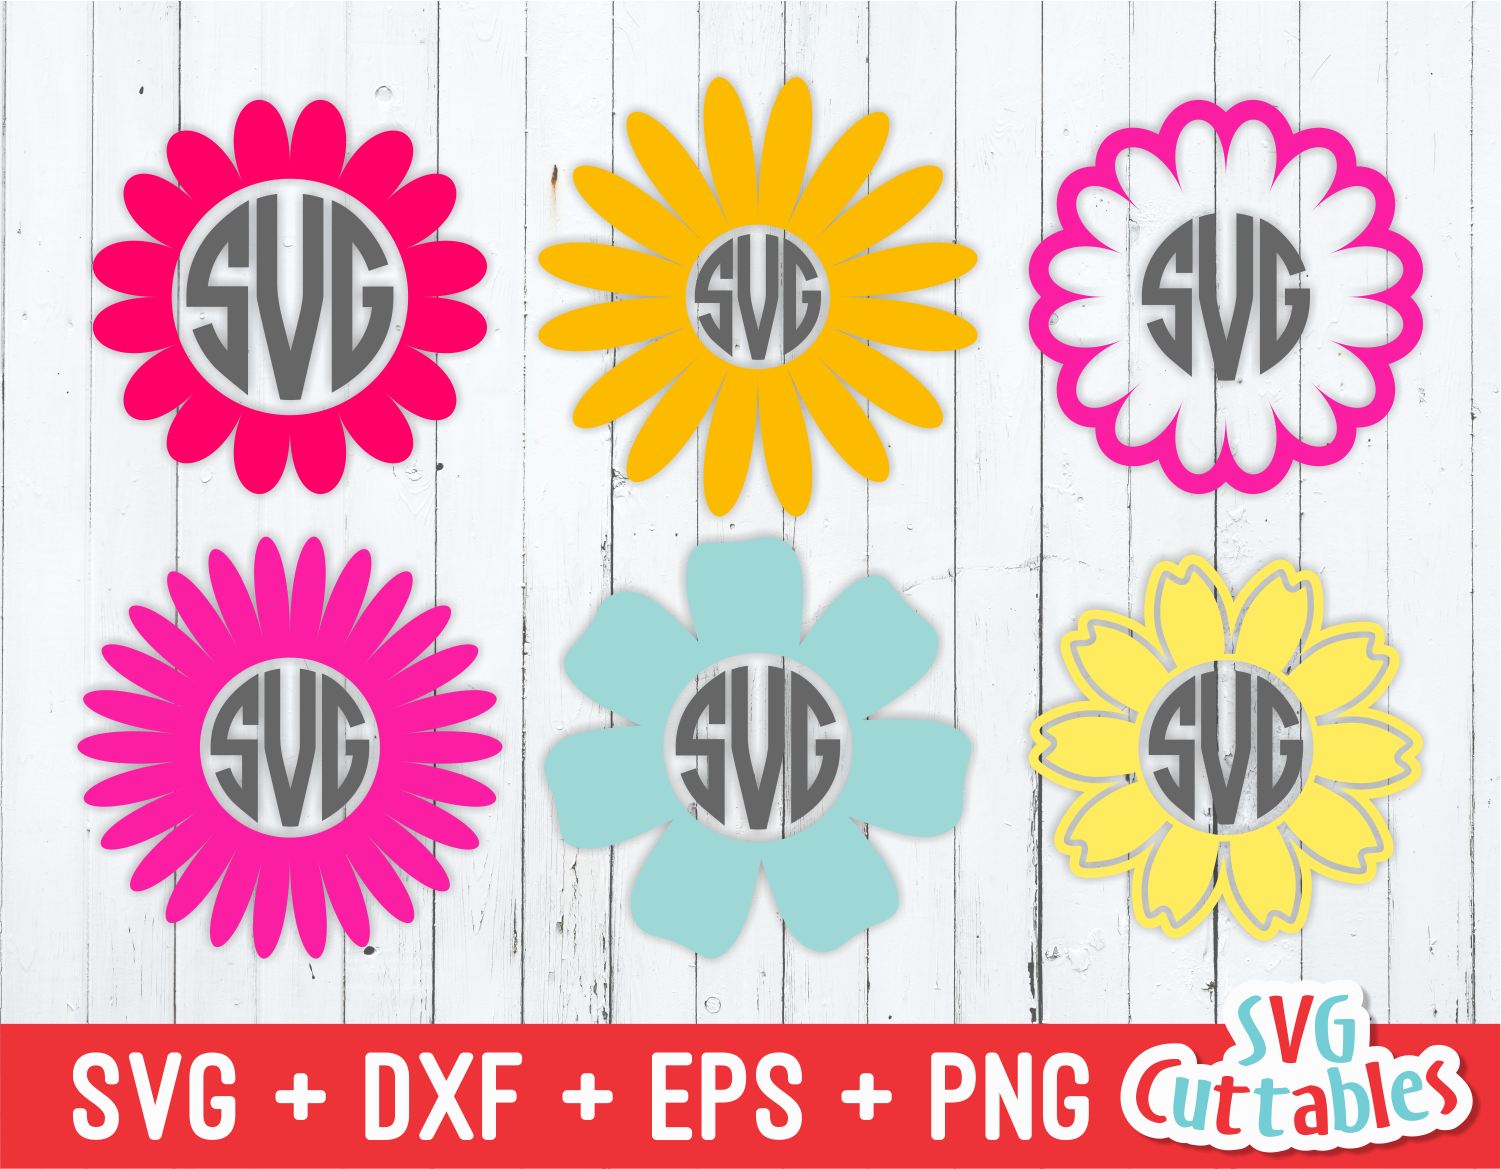 Free SVG Files for Cricut: The 15 Best Sites